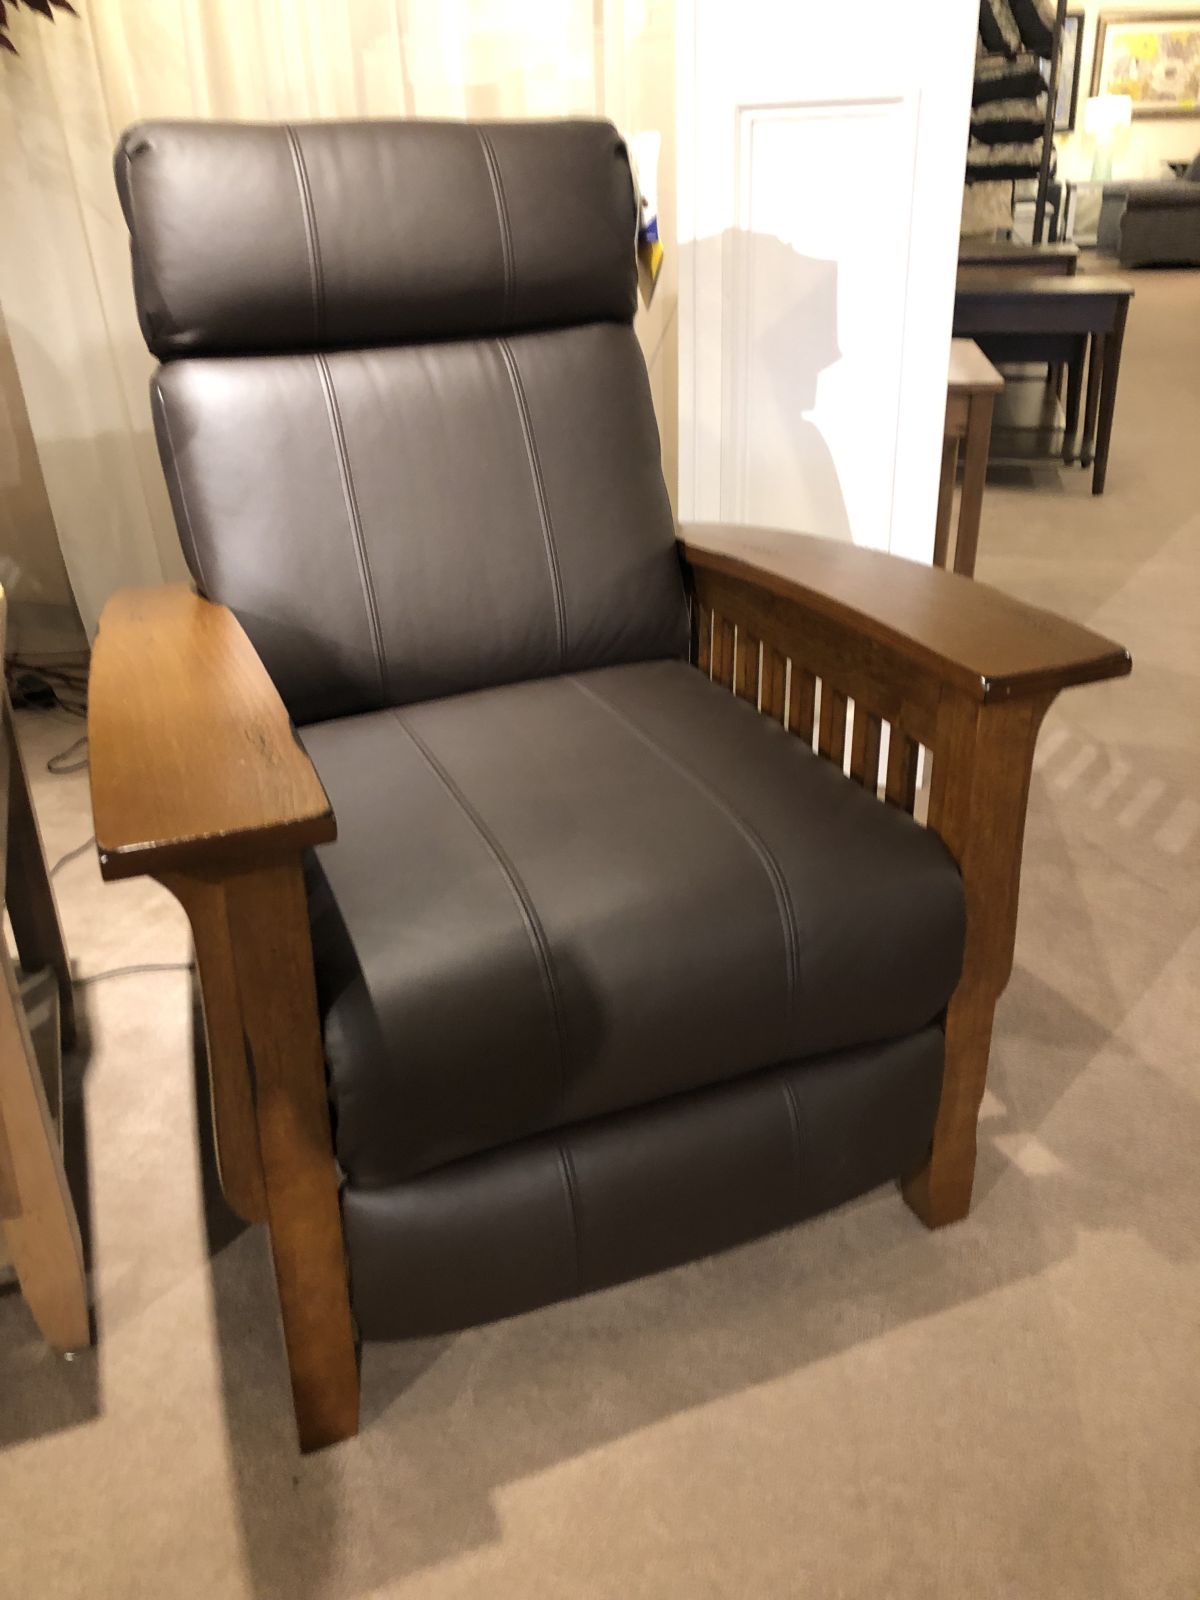 Best 2LP20DP Power 3 Way Recliner Leather Chocolate 2013980 On Sal for $1,498.64